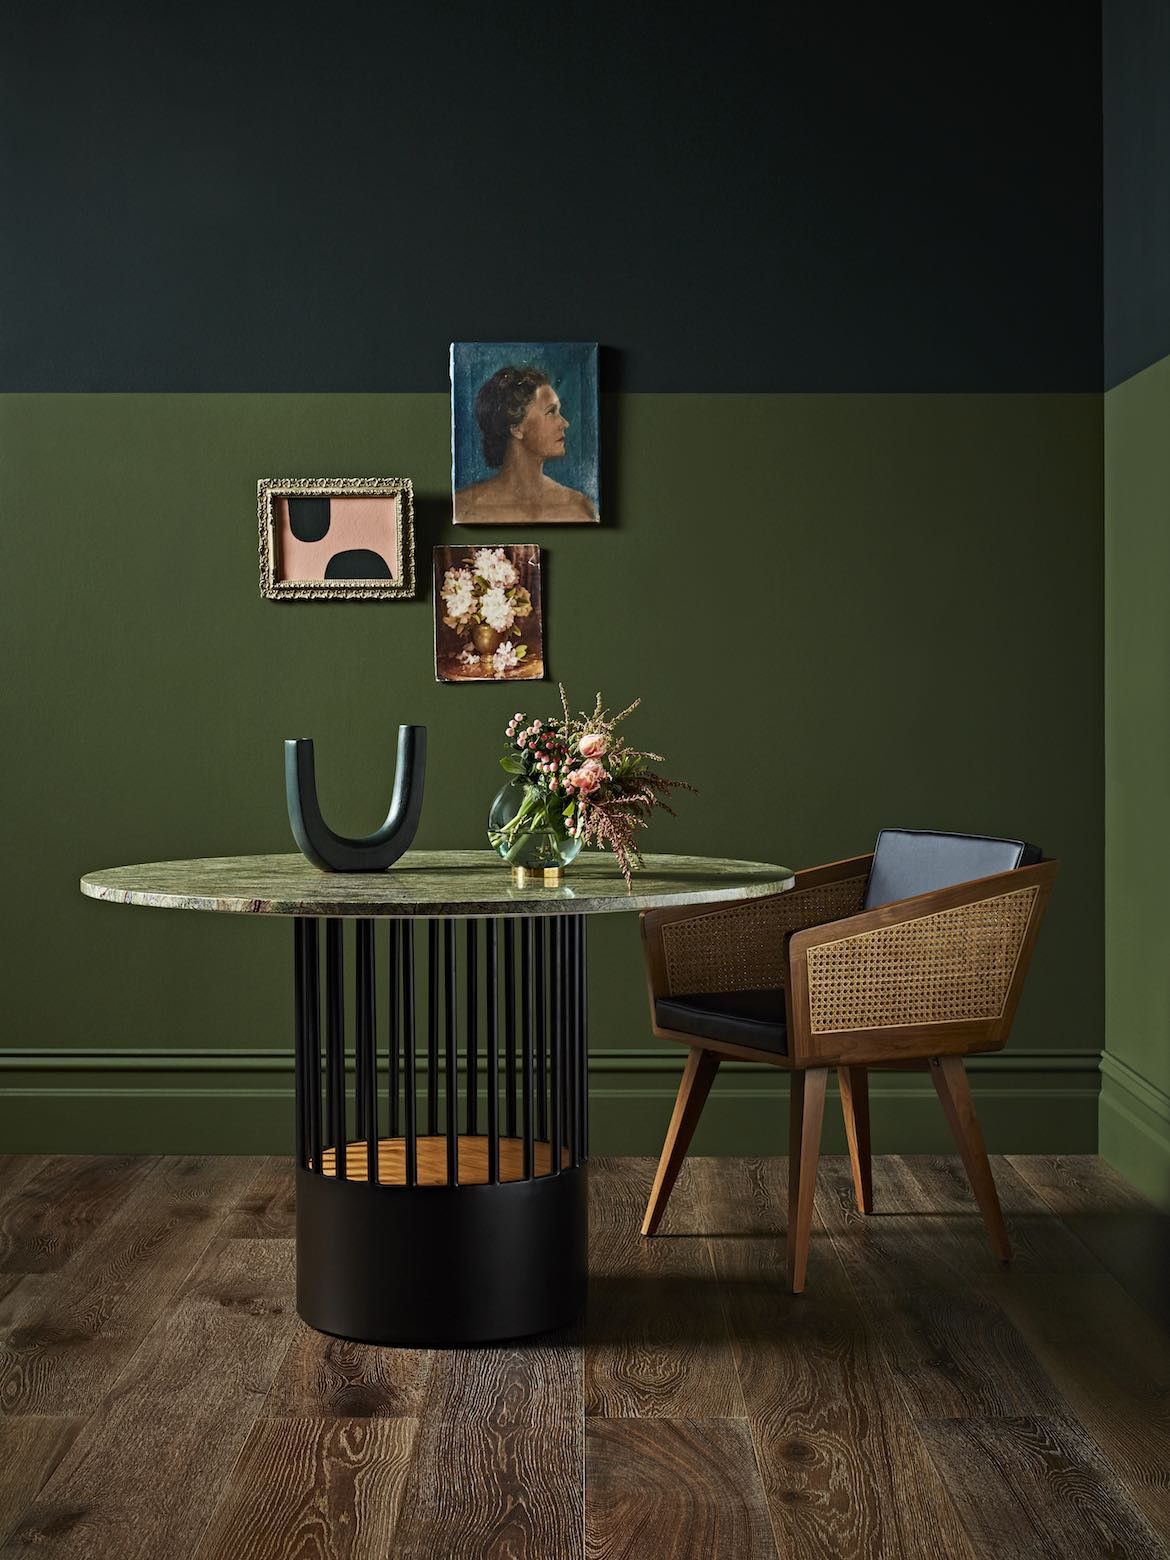 An angular black and rattan Reddie chair next to a circular green table with a cylindrical base in front of a green wall.